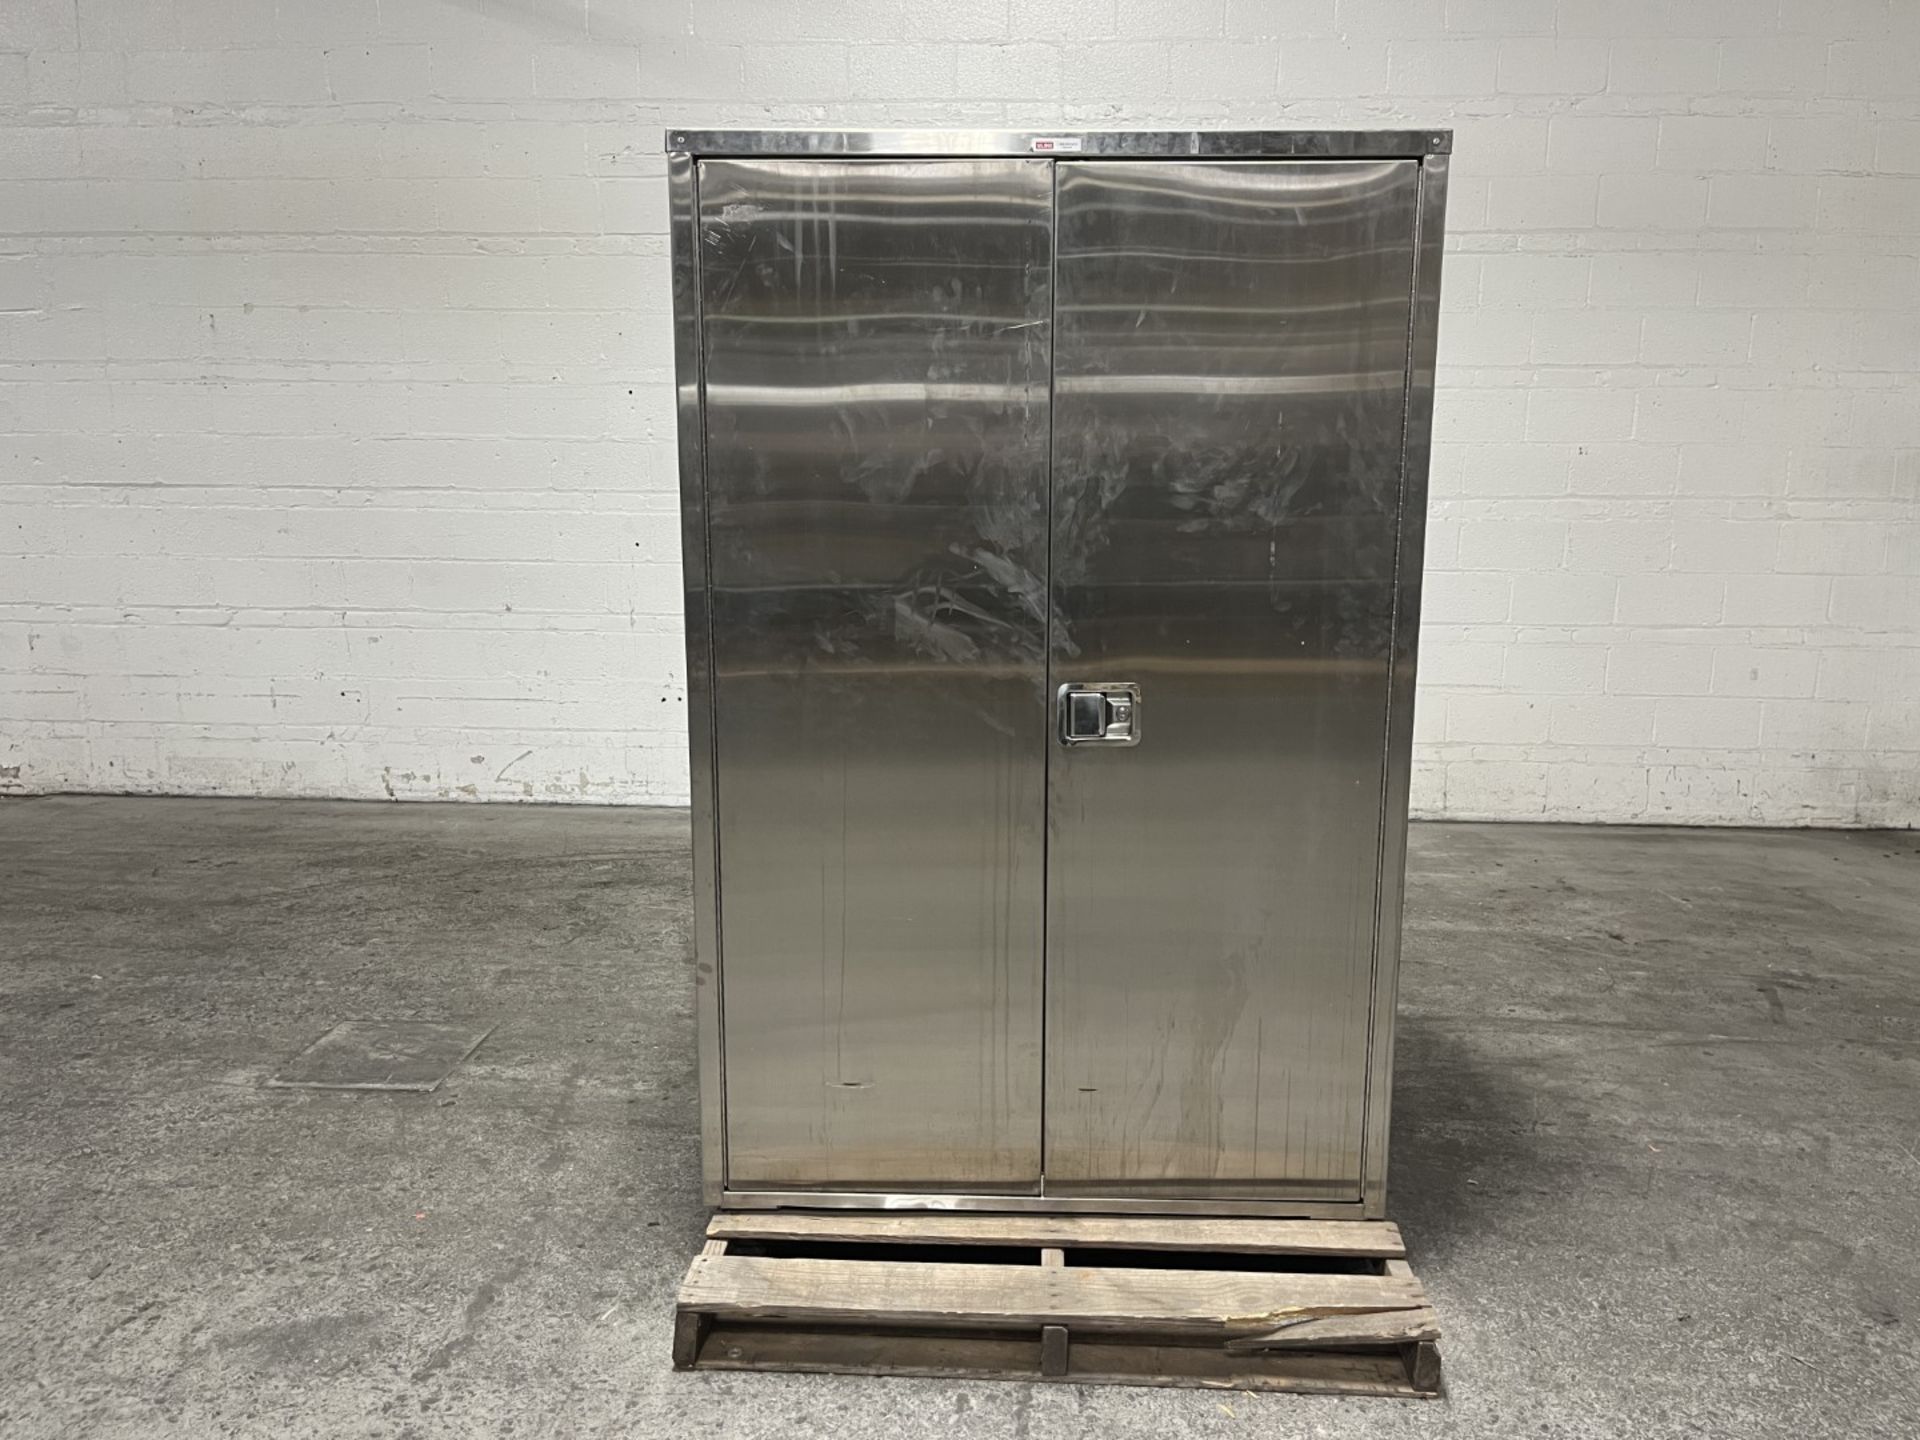 Stainless steel cabinet measuring 24" x 48" x 72" {TAG: 1180109}